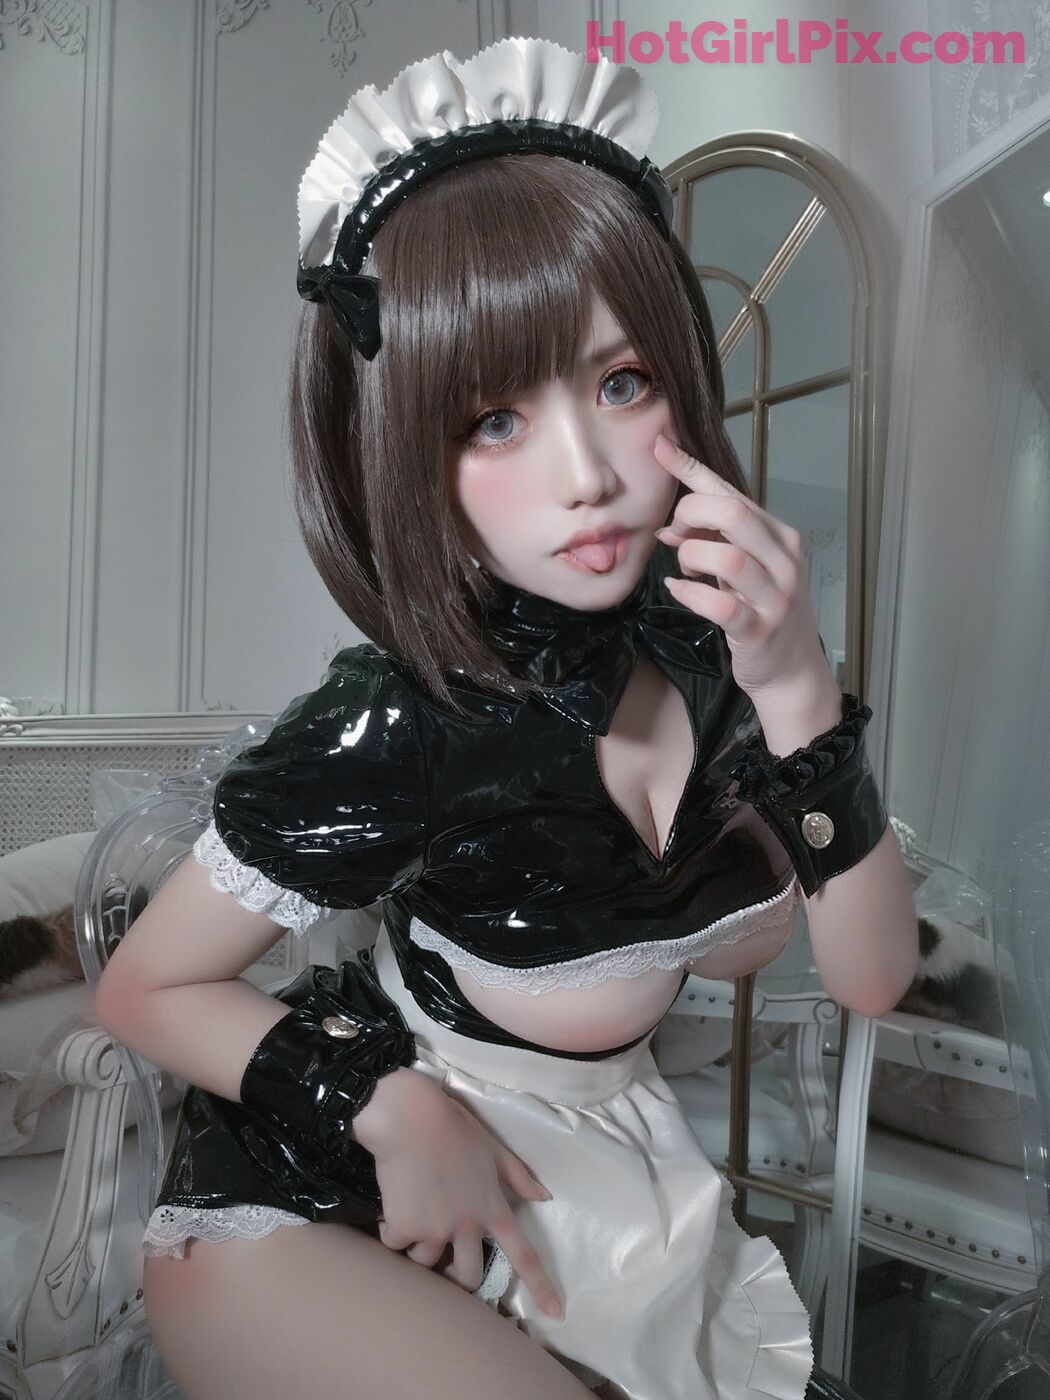 [Beauty Coser] "Breakfast Milk" with a smile